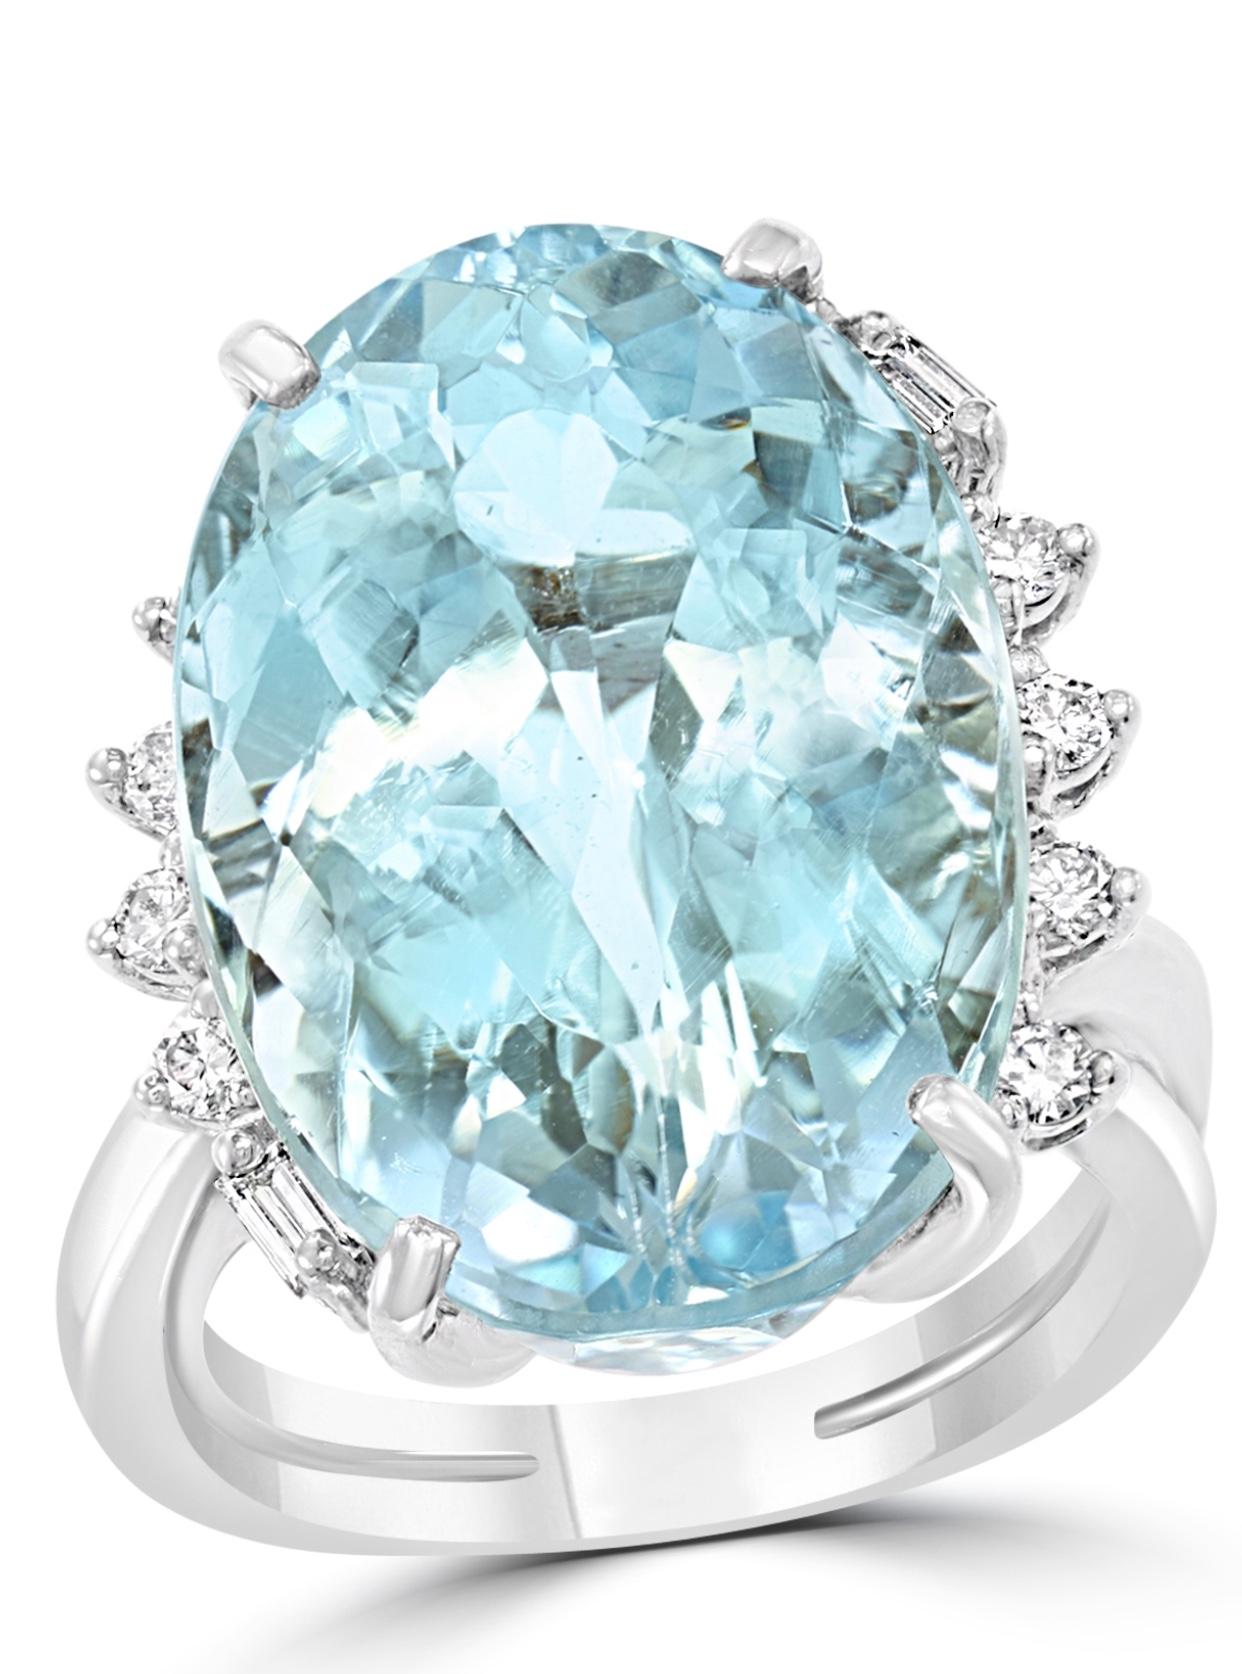 25 Carat Natural Aquamarine & Diamond Cocktail Ring  18 K Yellow Gold , Estate
A classic, Cocktail ring 
Huge 25 Carat of very clean no inclusion  Aquamarine Oval shape , full of luster and shine but light in color 
0.5  Carats of Brilliant diamonds